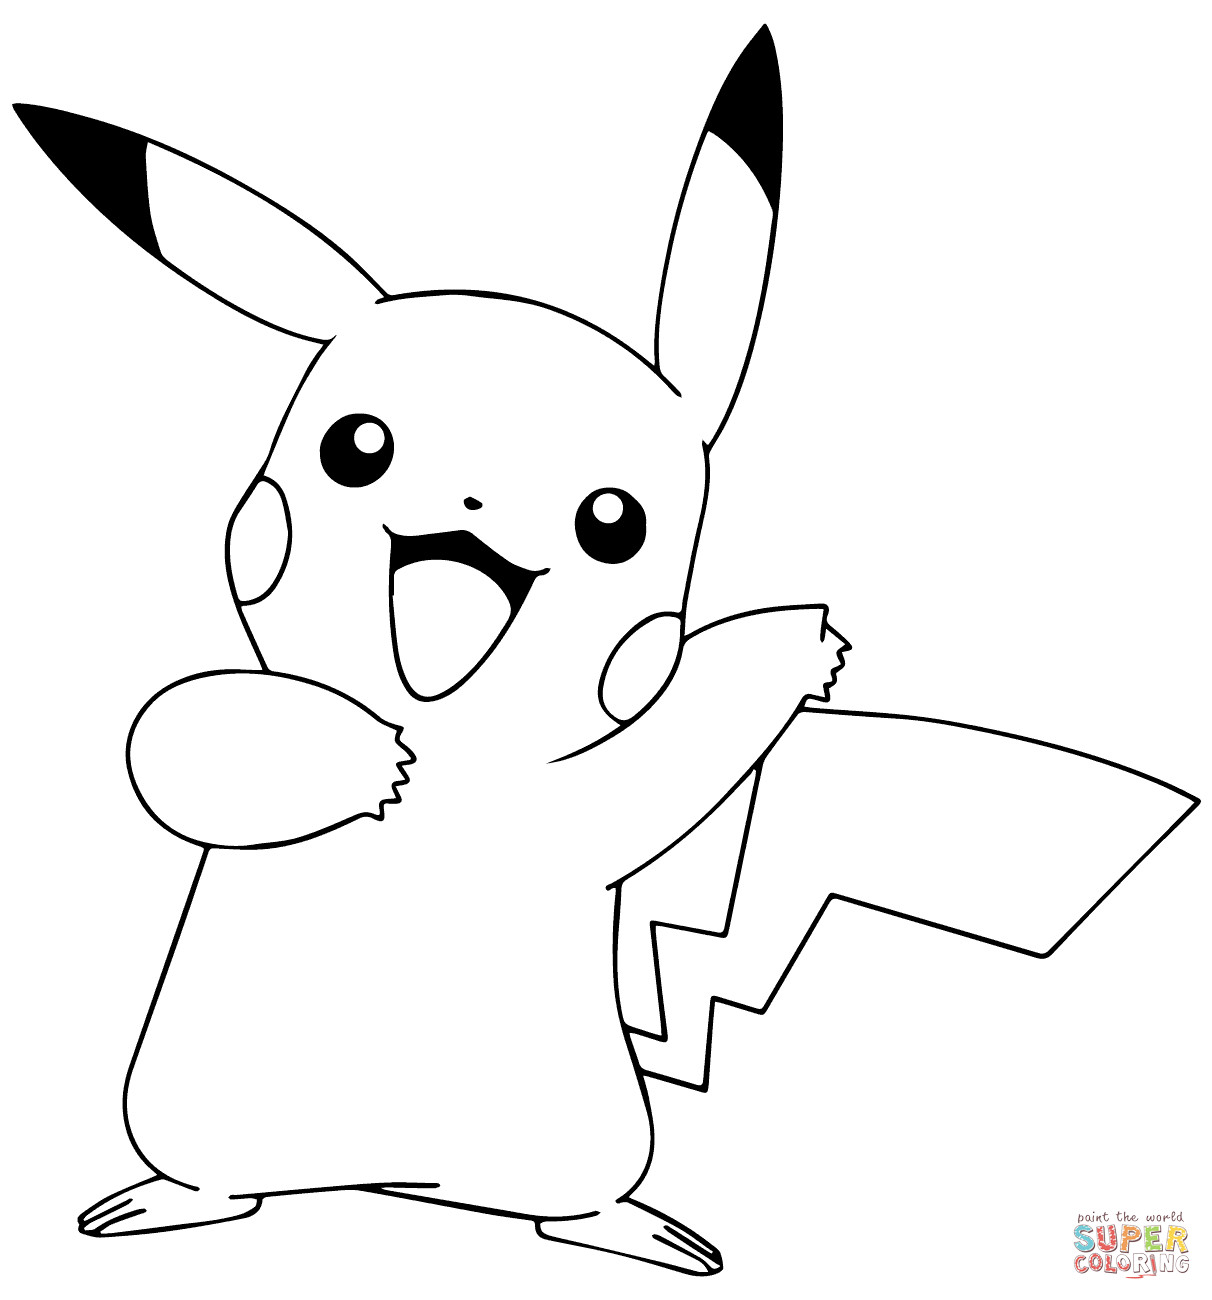 Girl Pikachu Coloring Pages
 Pikachu from Pokémon GO coloring page